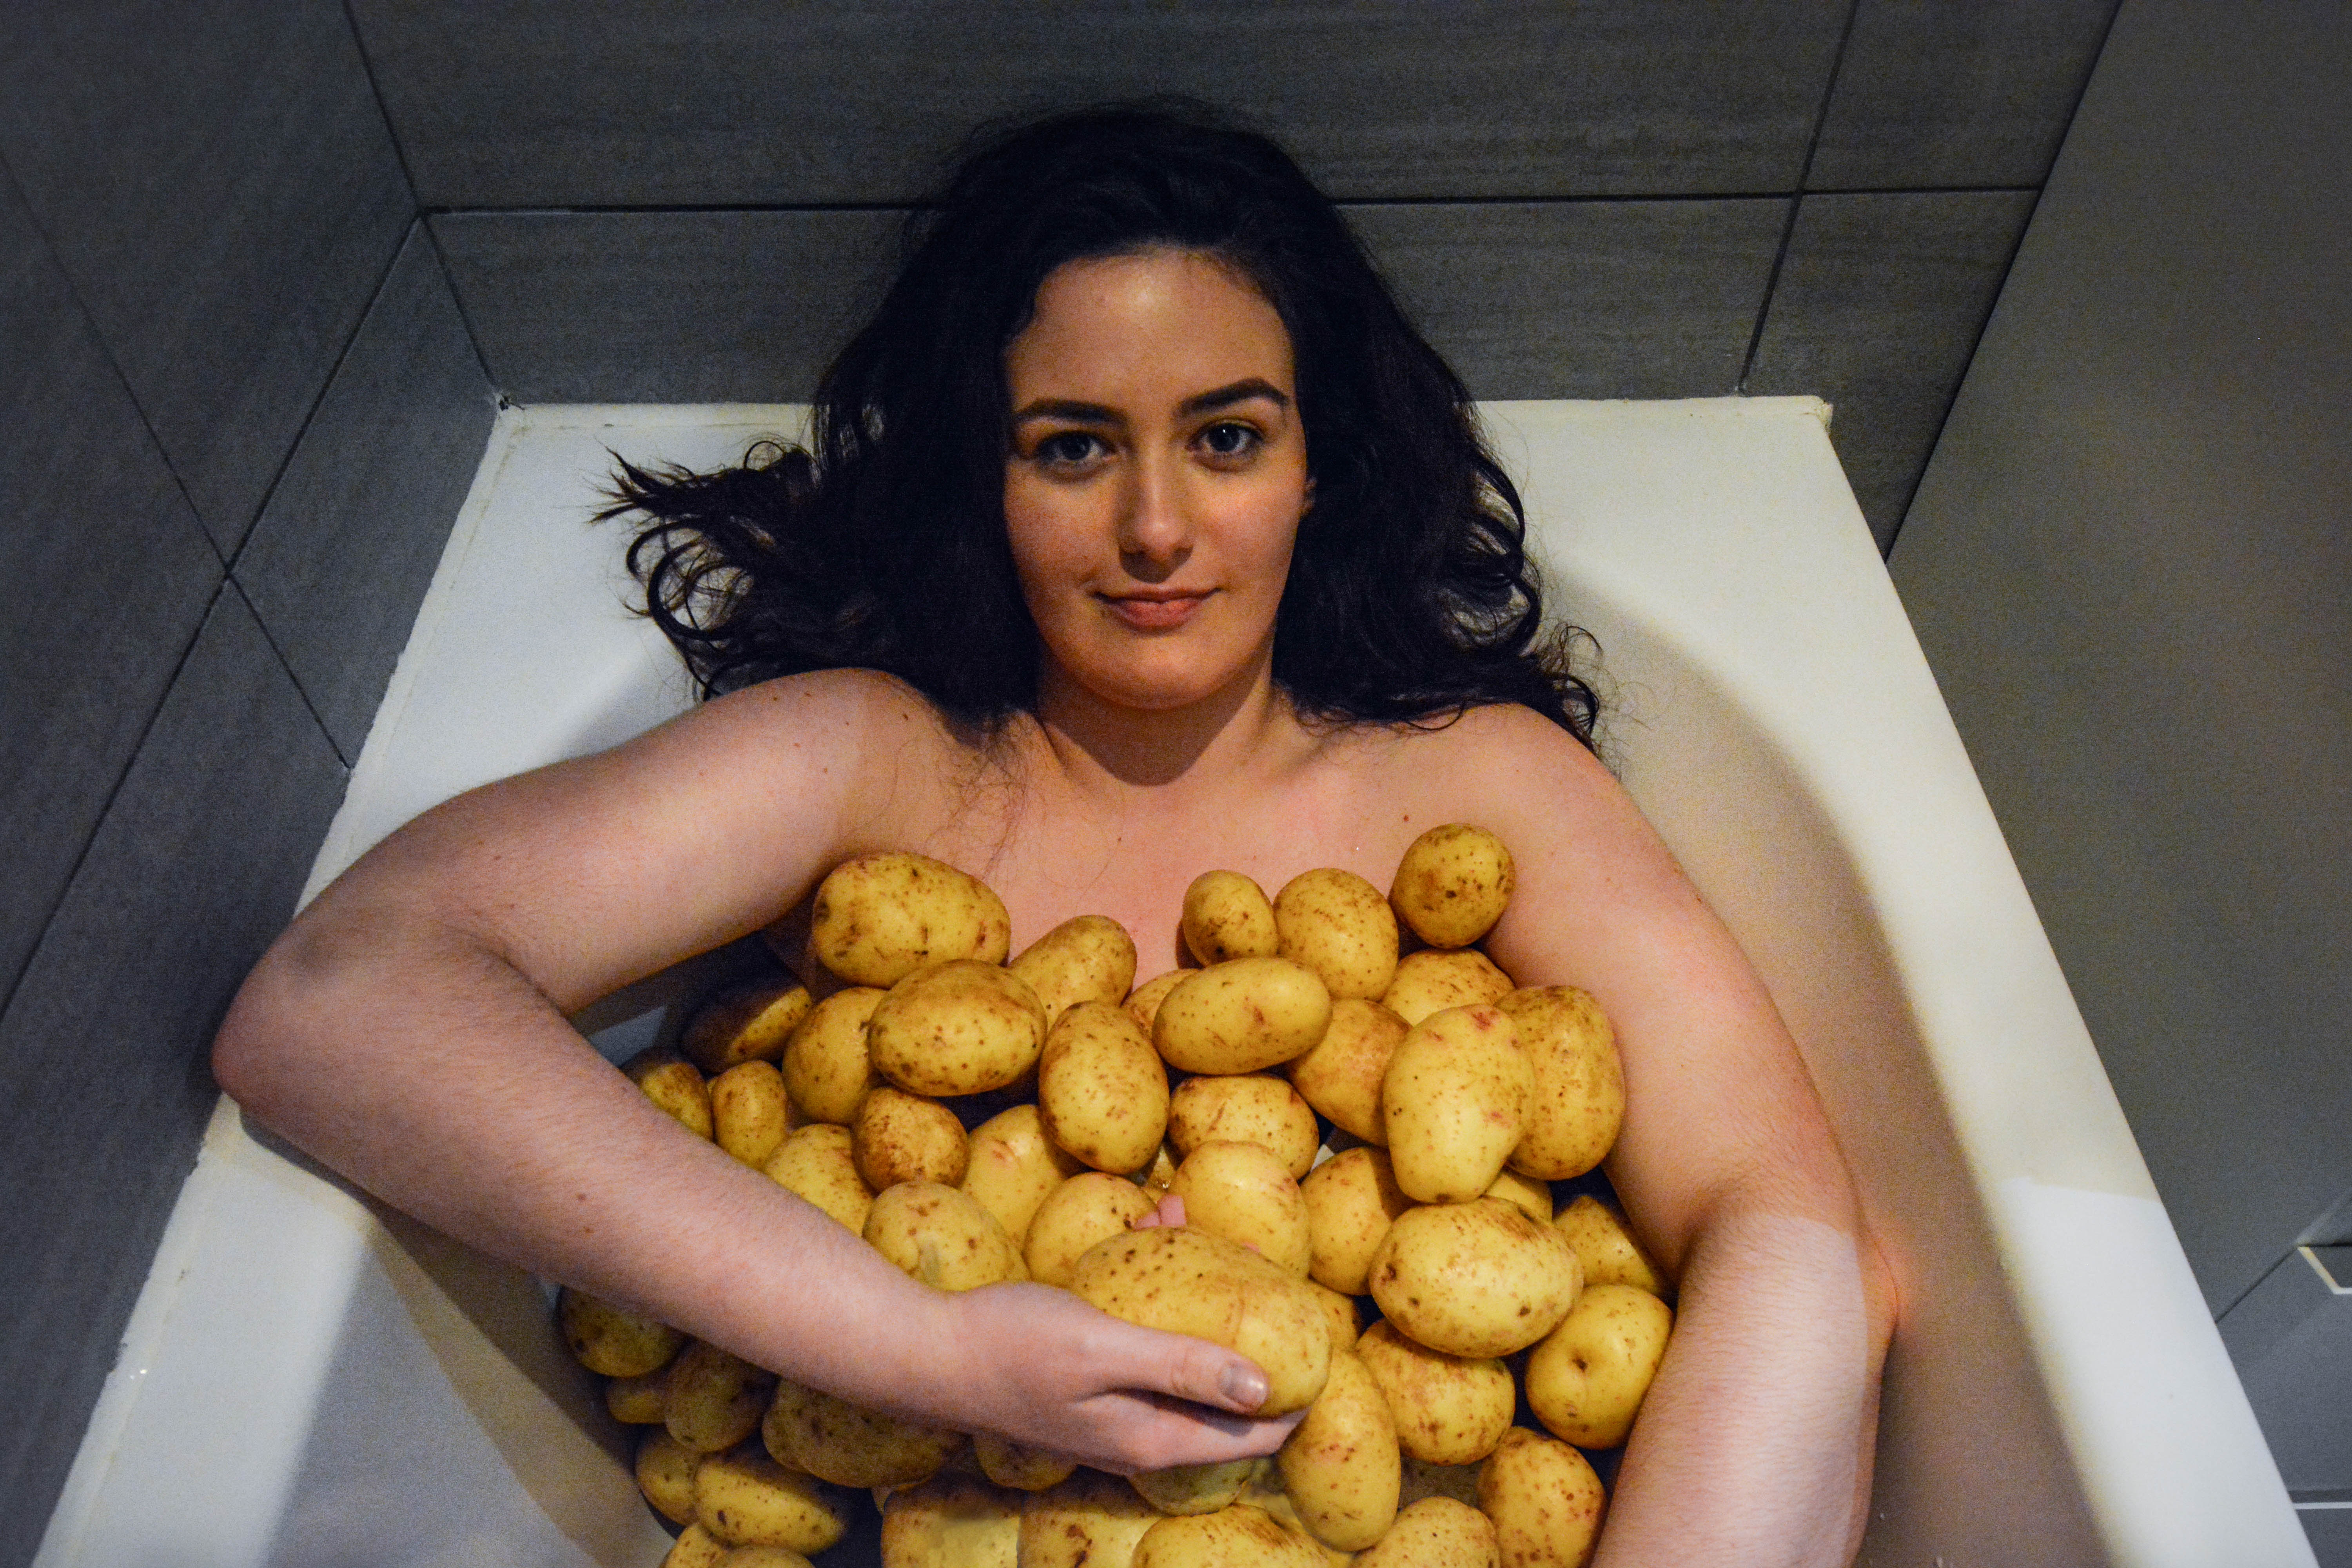 ‘They used to call me potato’ – How fat shaming made me lose weight?